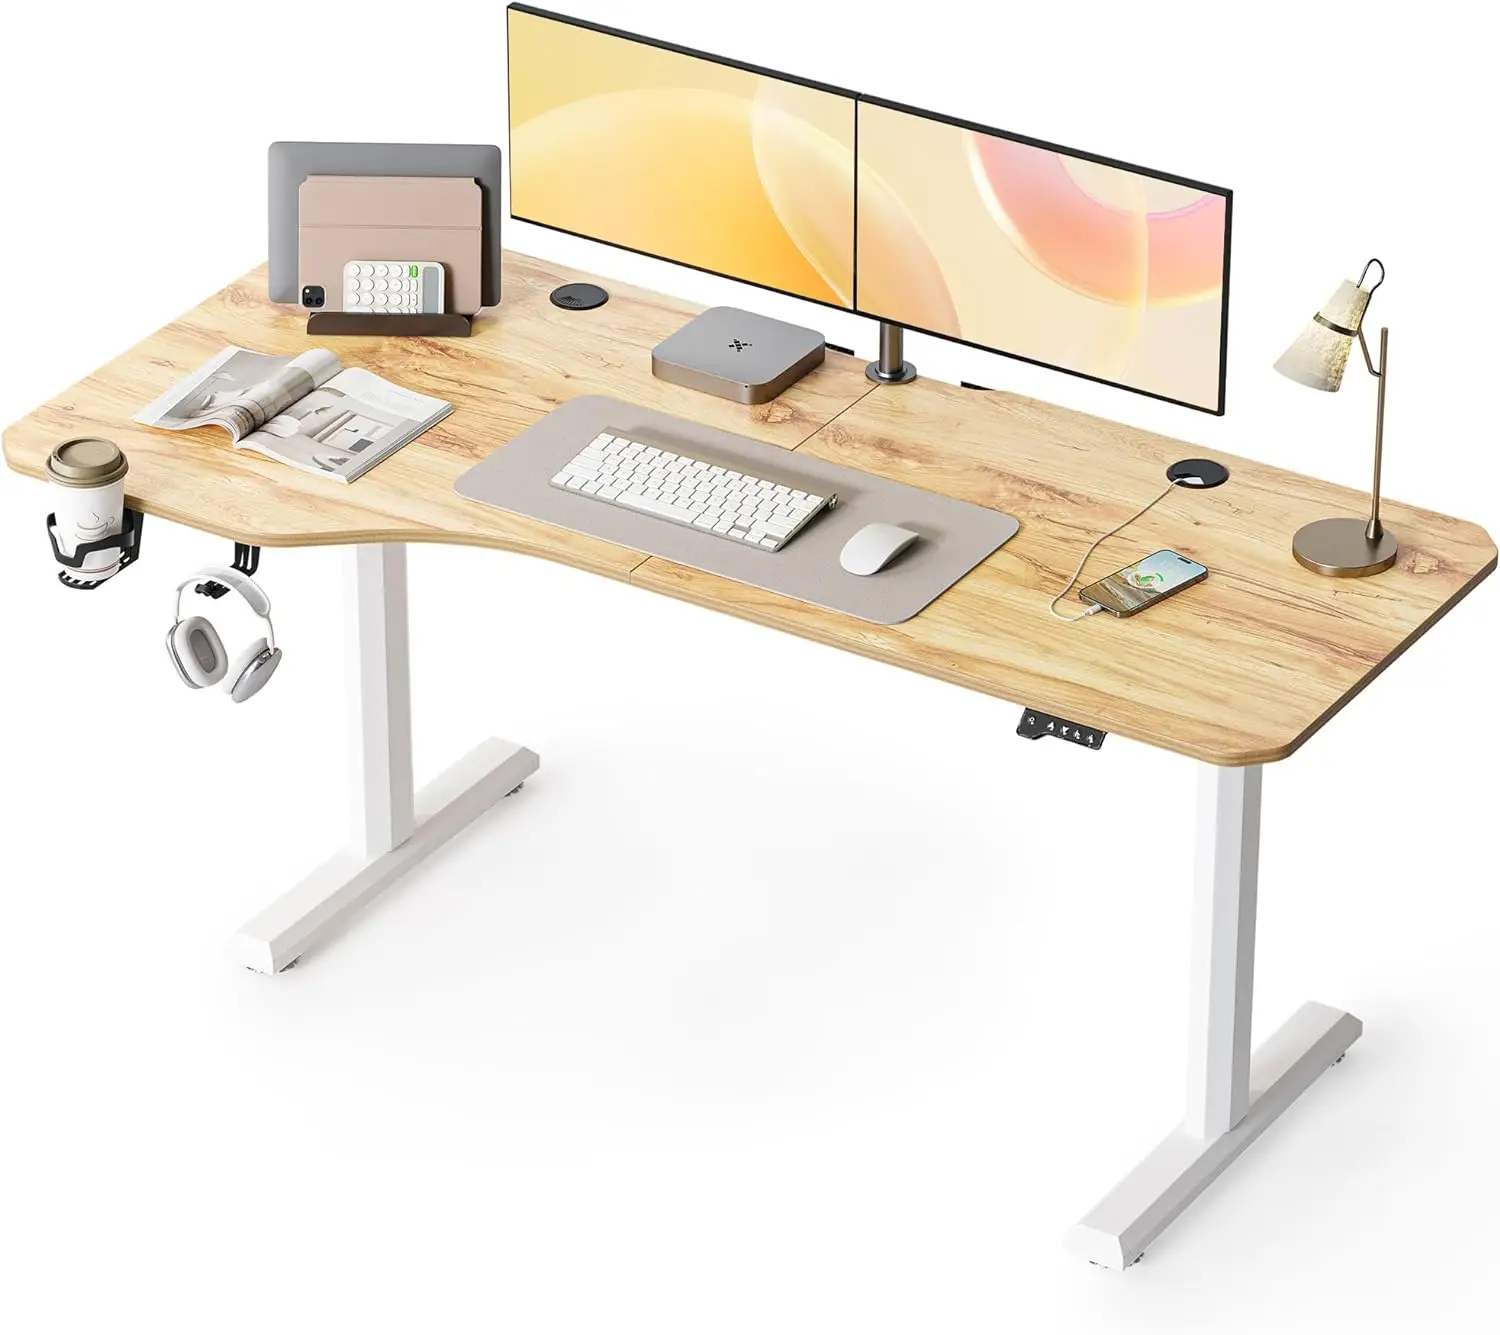 

Height Adjustable Electric Standing Desk, 63 x 24 Inches Stand up Table, Sit Stand Home Office Desk with Splice Board